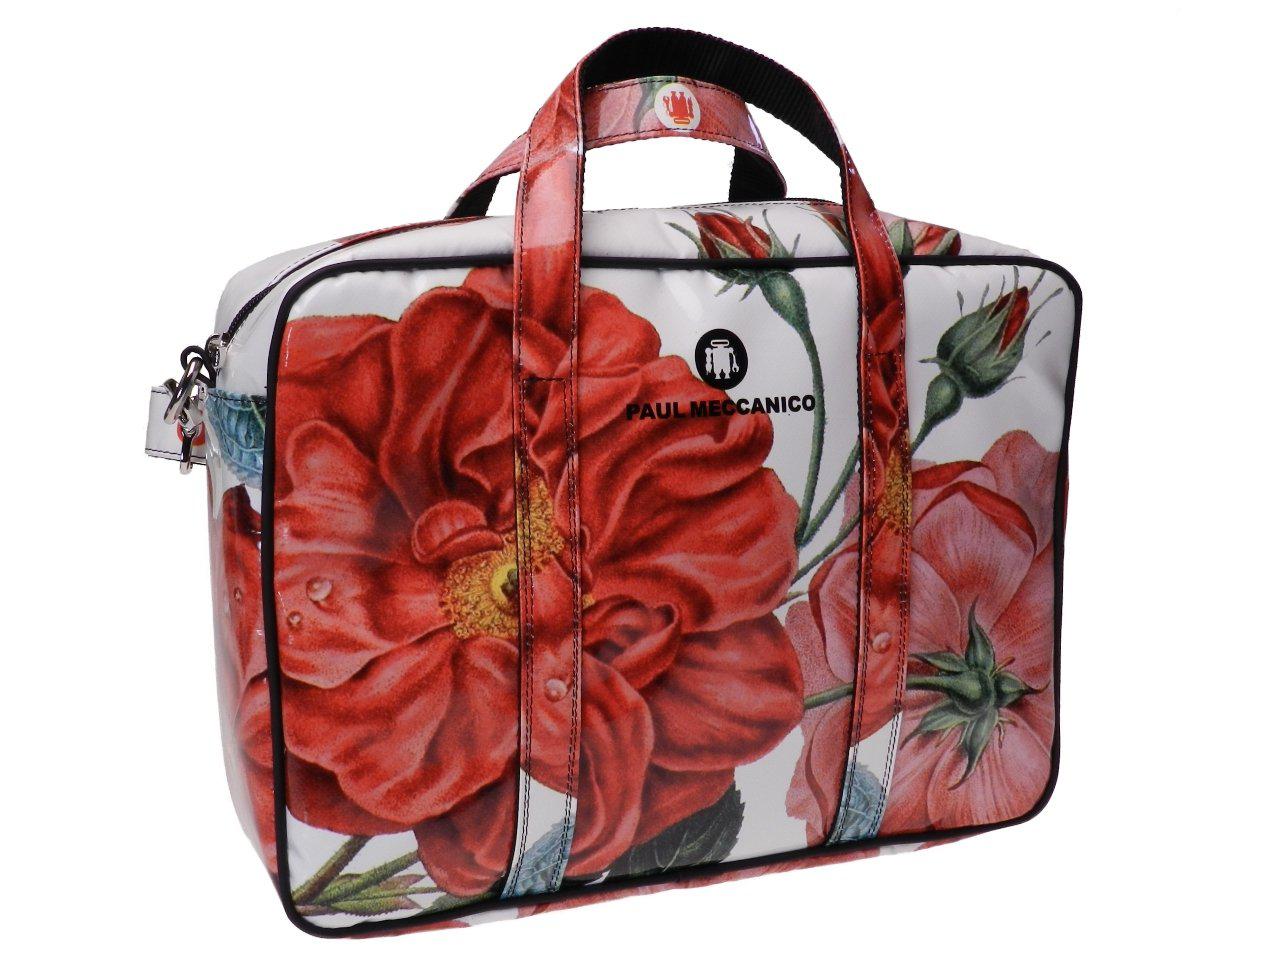 WOMAN BRIEFCASE OFF WHITE COLOUR FLORAL FANTASY. KART MODEL MADE OF LORRY TARPAULIN. - Limited Edition Paul Meccanico